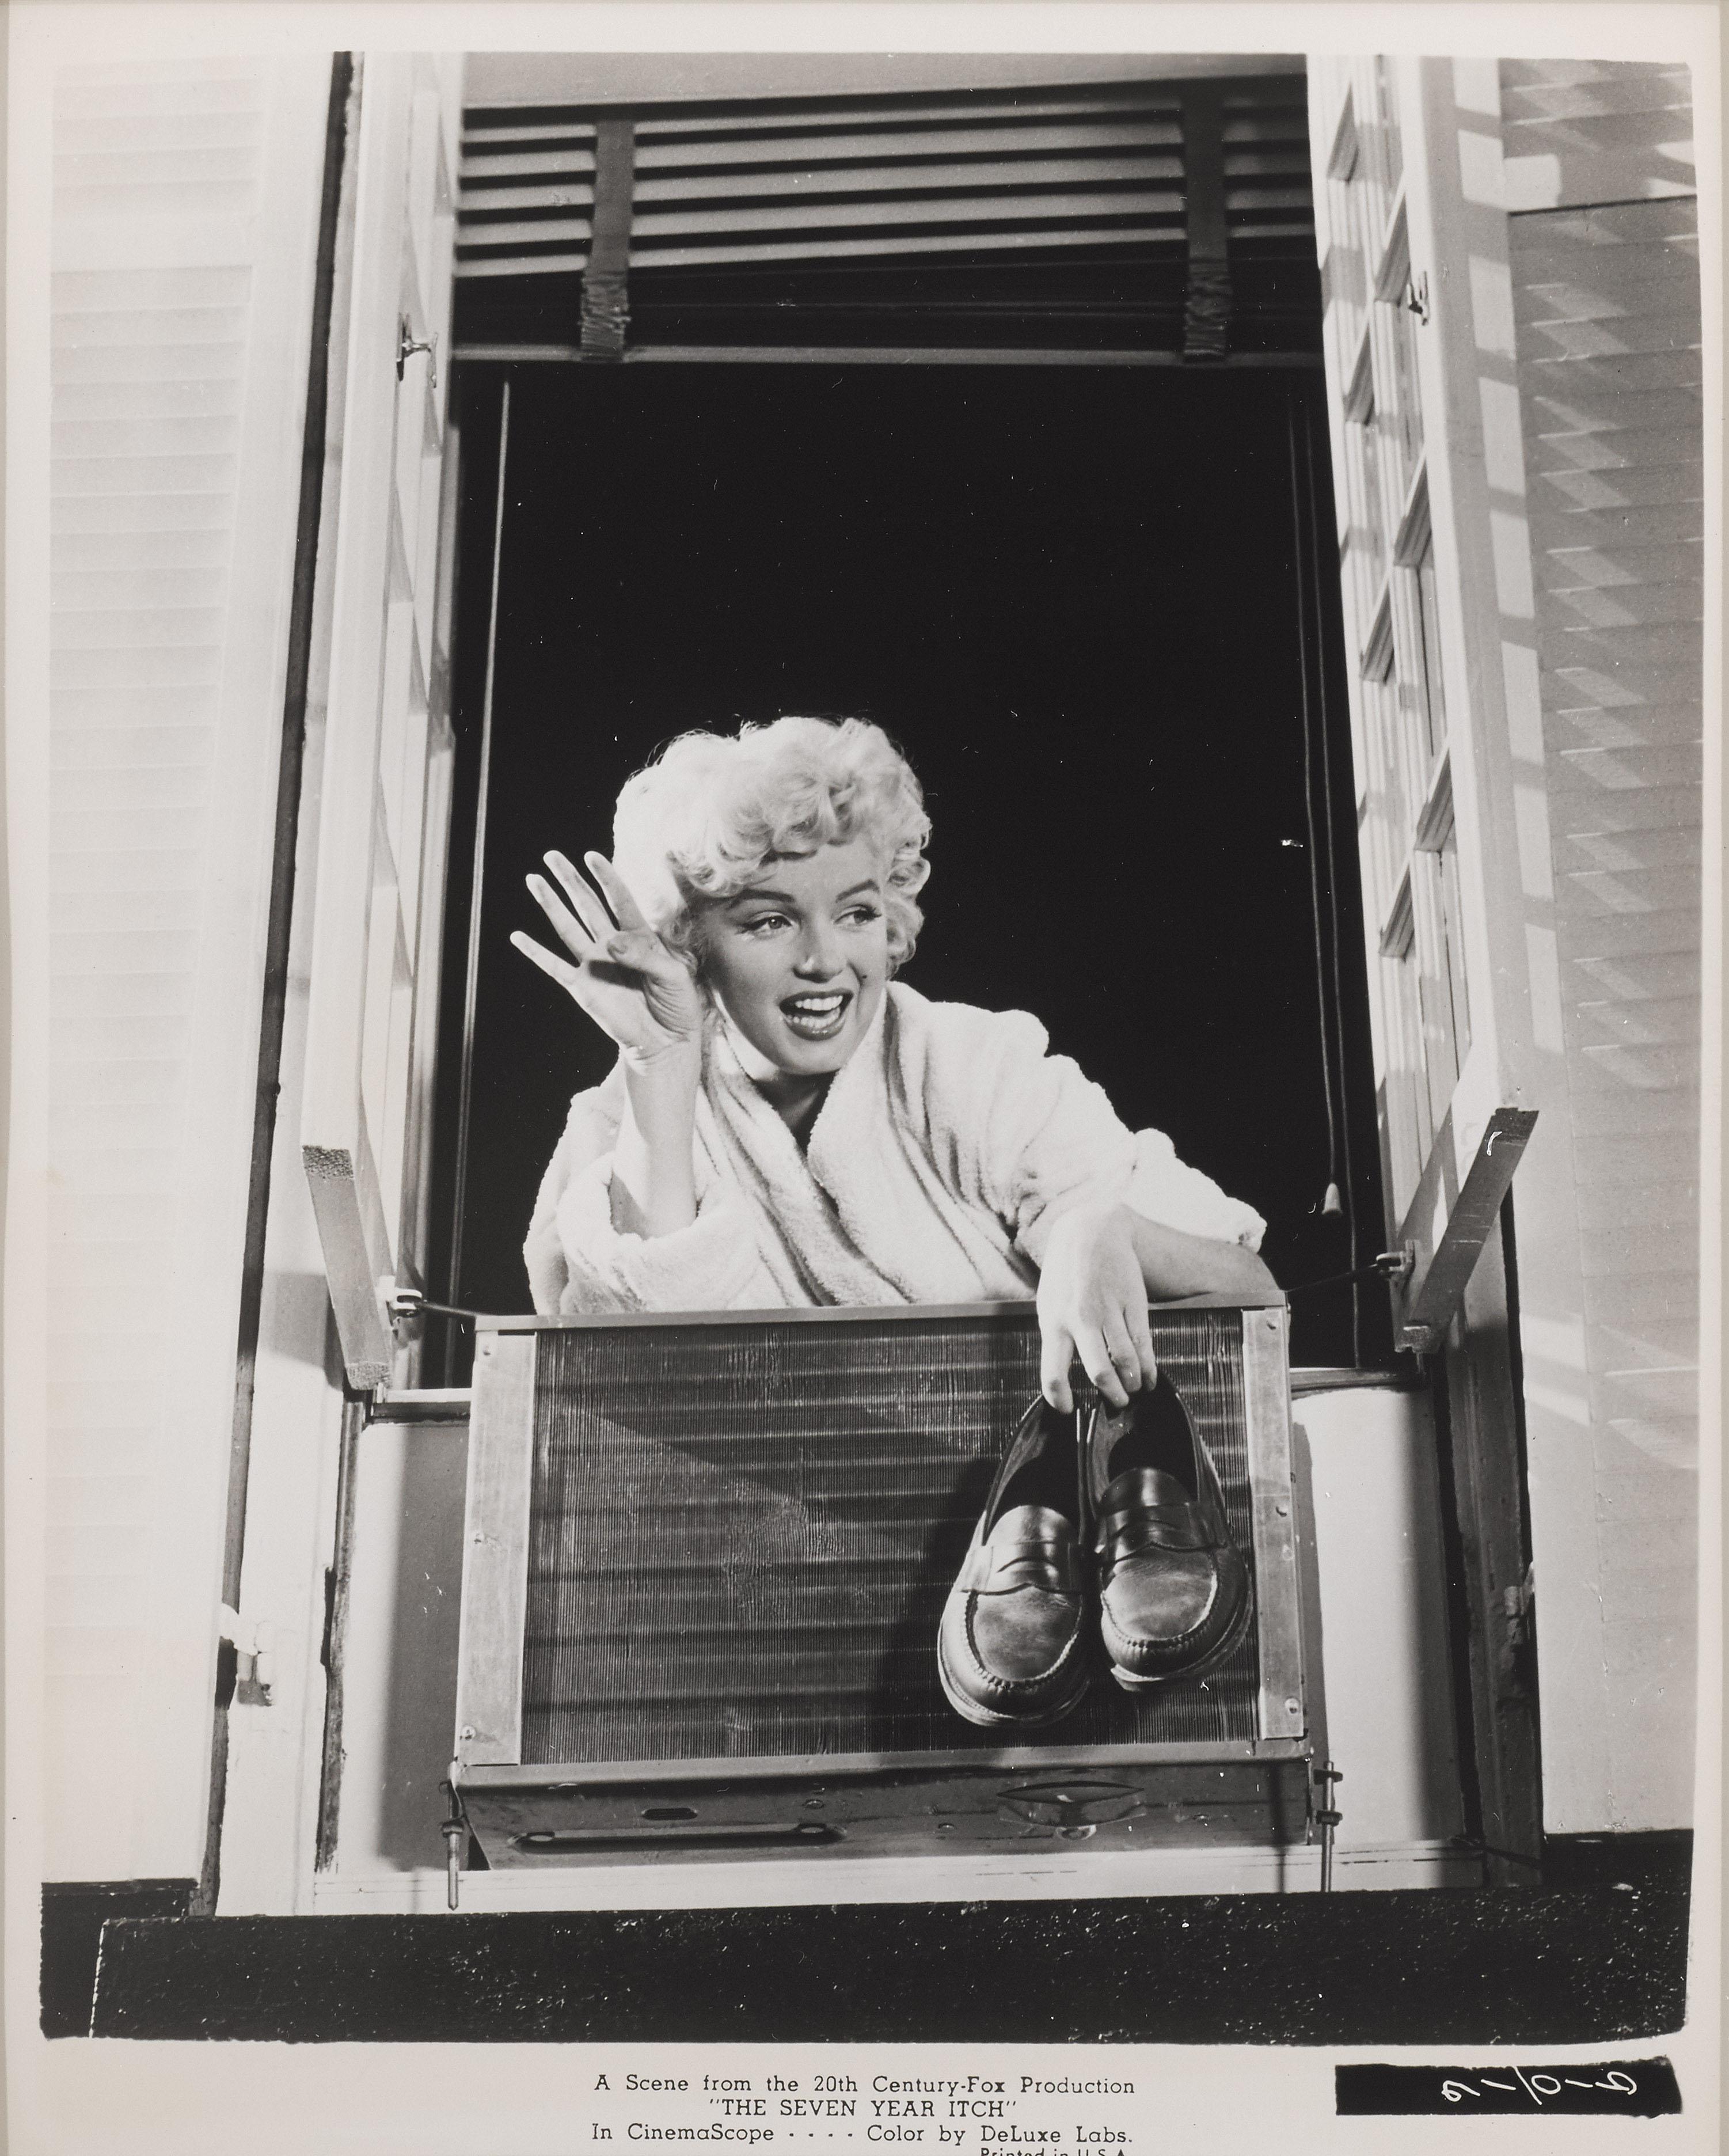 Original 1955 US 20th century Fox photographic production still used to promote the romance, comedy film The Seven Year Itch. Directed by Billy Wilder and starring Marilyn Monroe, Tom Ewell, Evelyn Keyes. 
This piece is Framed in a Sapele wood